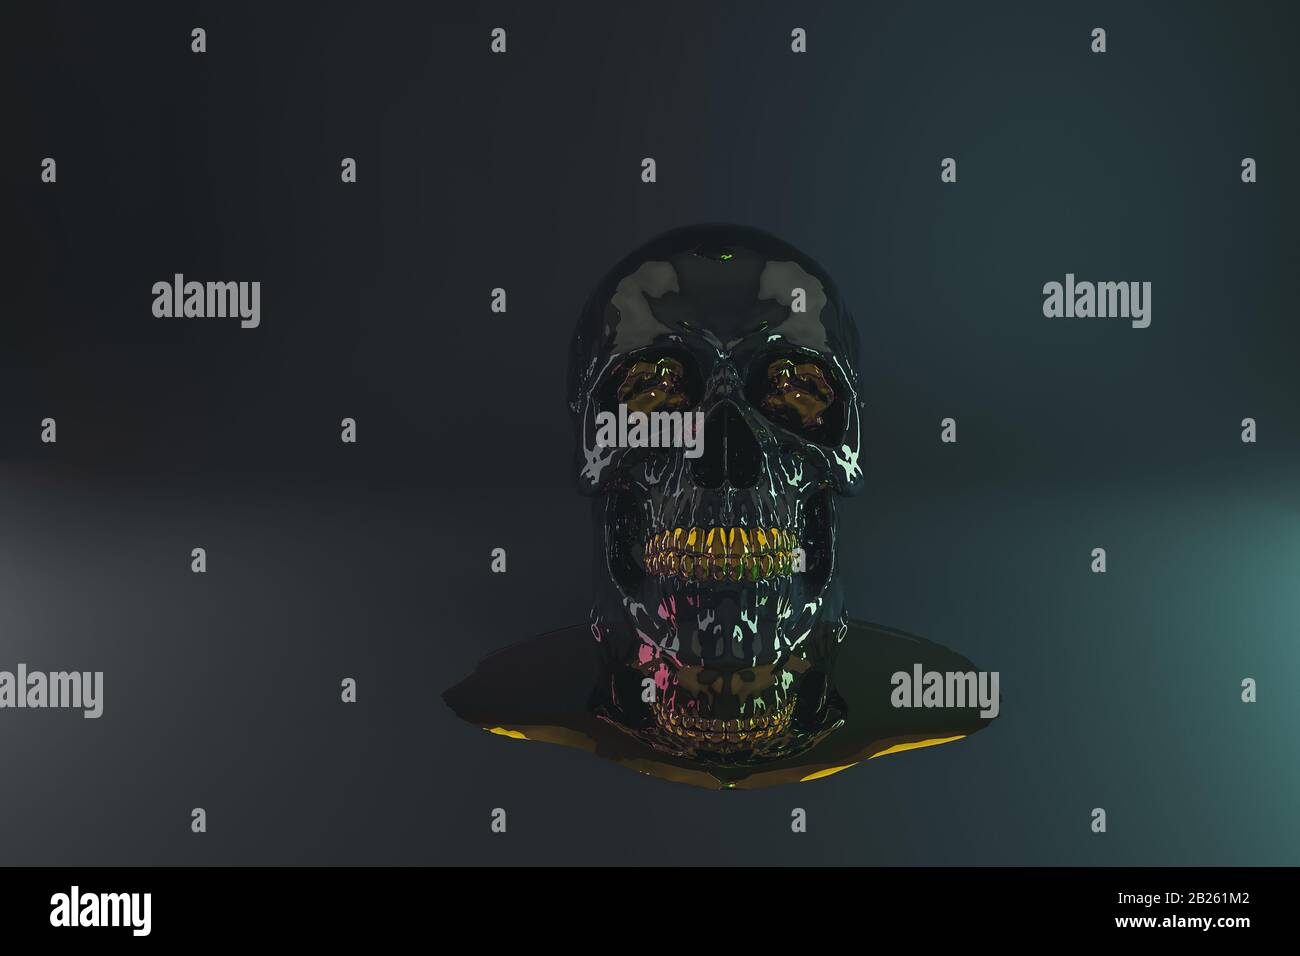 3d rendering of black glossy skull with golden teeth and gold stones in the eye socket Stock Photo